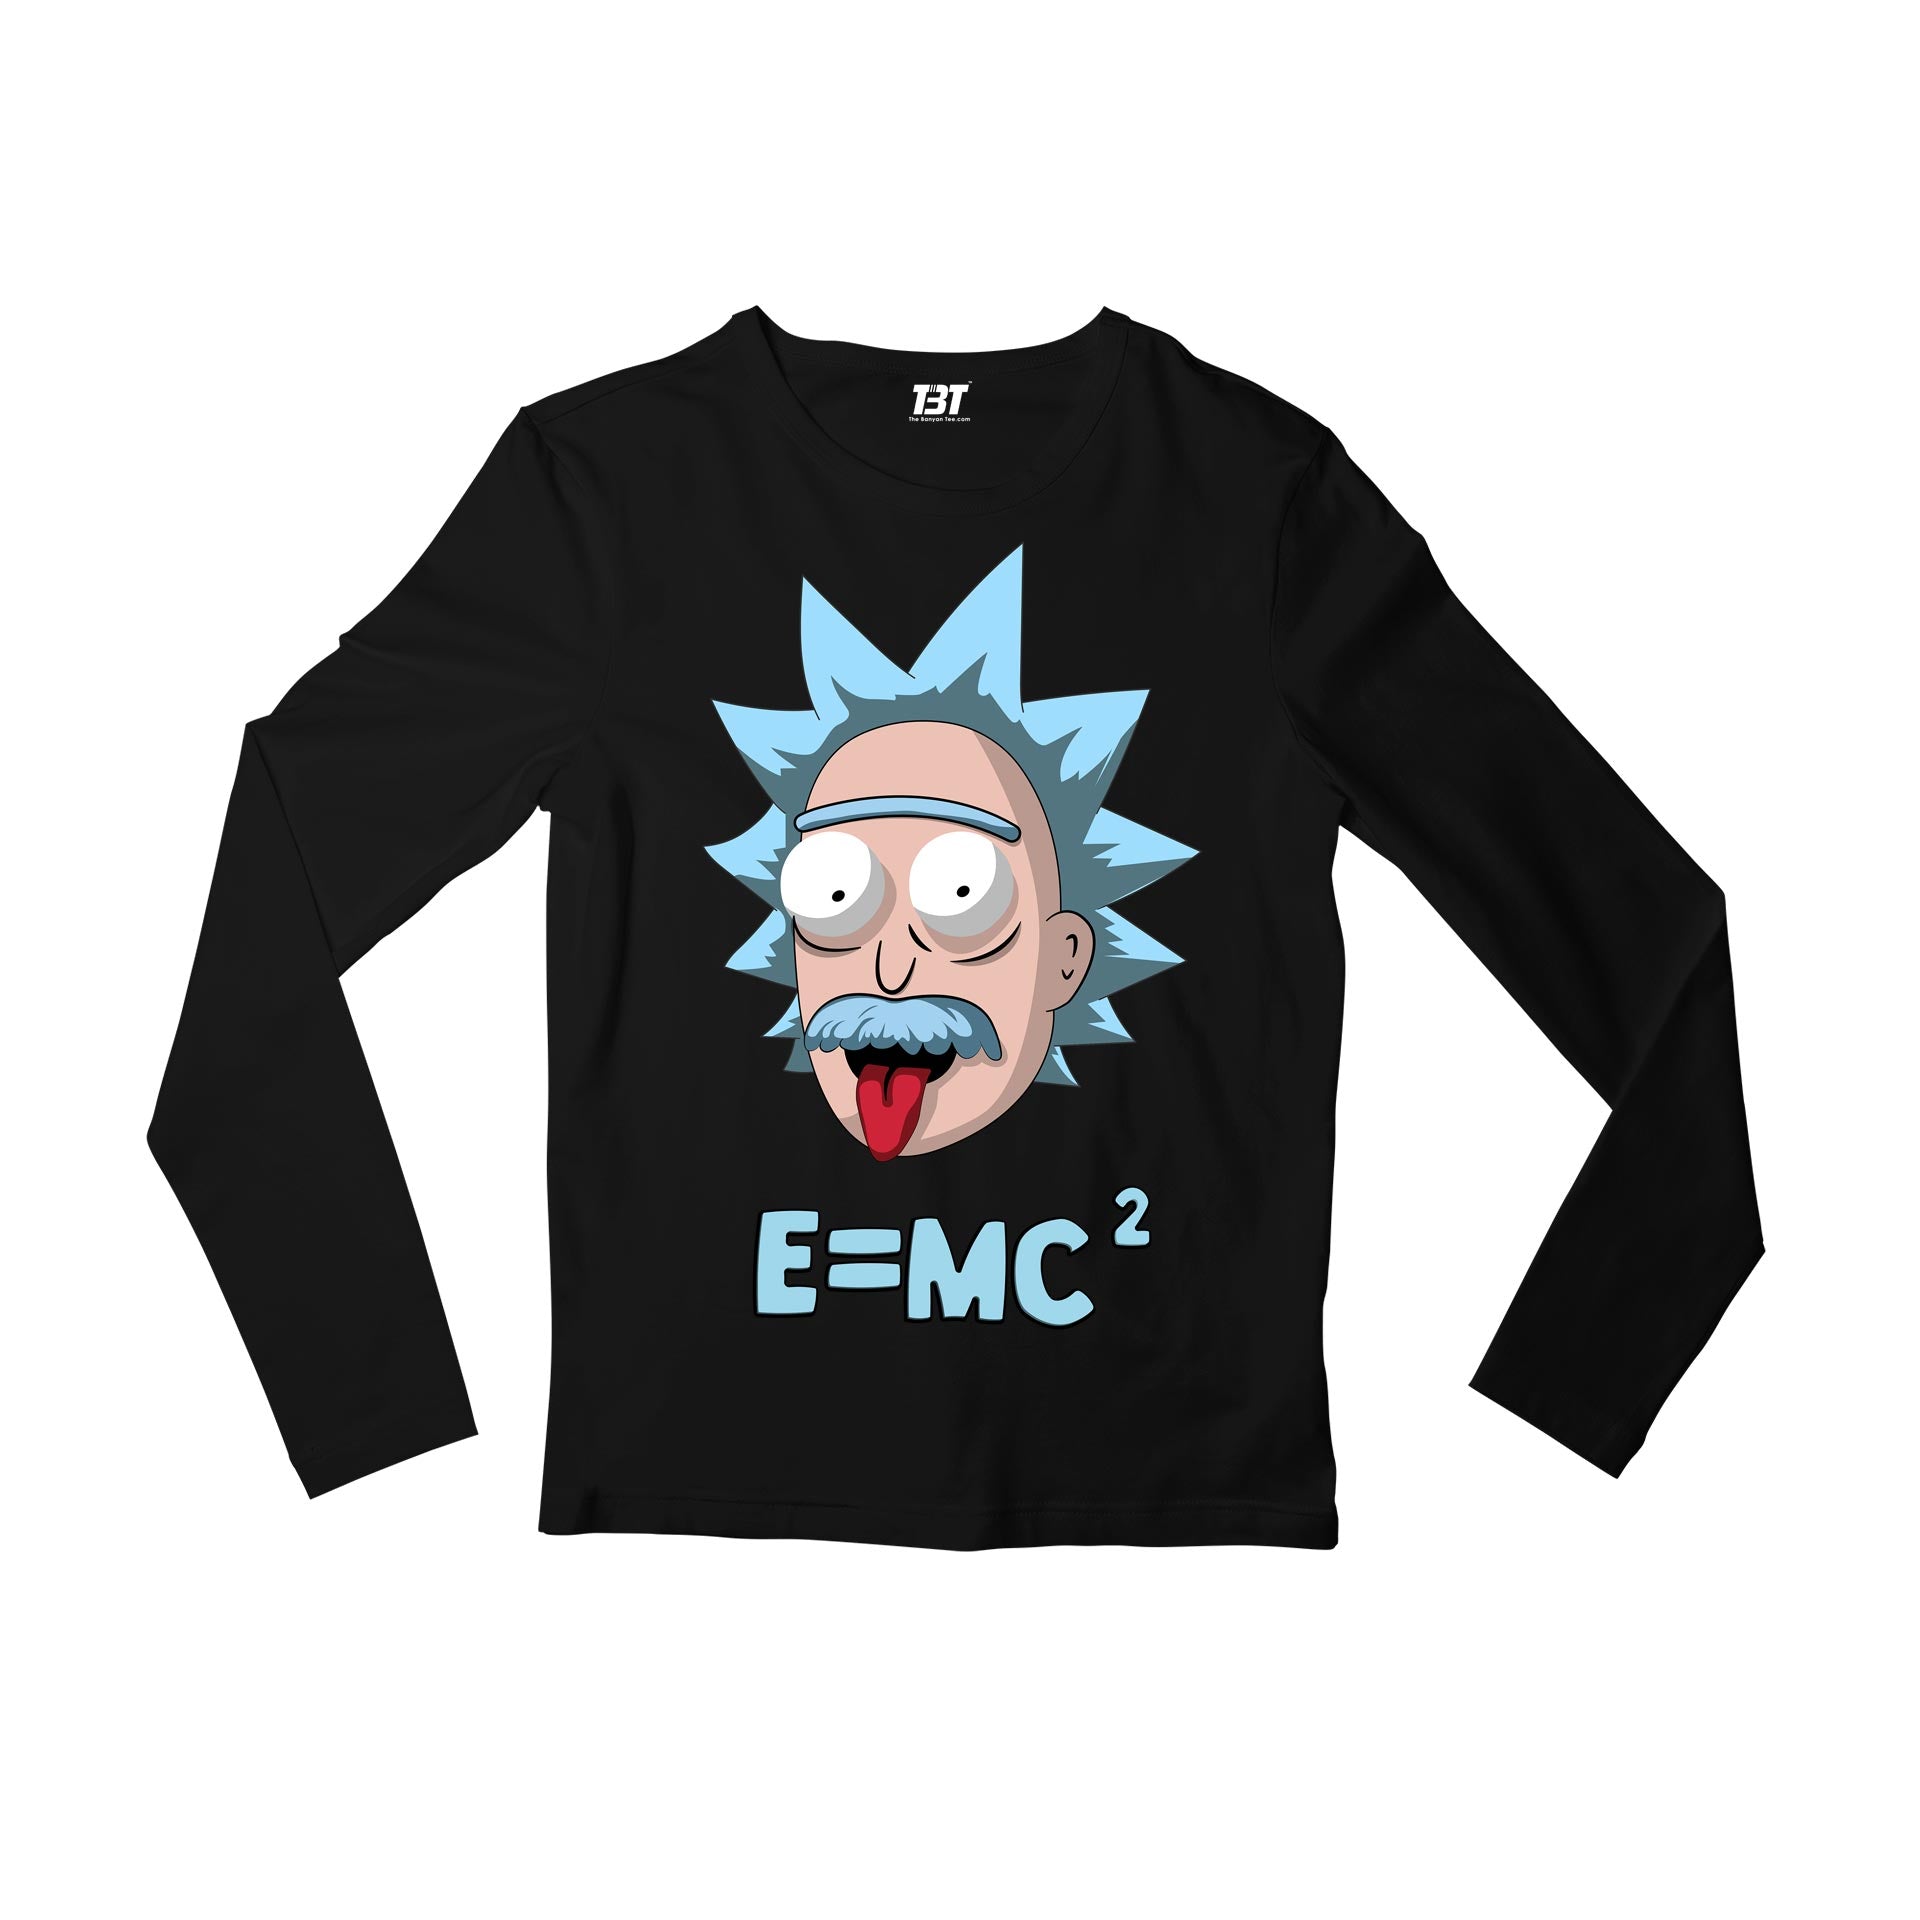 rick and morty genius full sleeves long sleeves buy online india the banyan tee tbt men women girls boys unisex black rick and morty online summer beth mr meeseeks jerry quote vector art clothing accessories merchandise